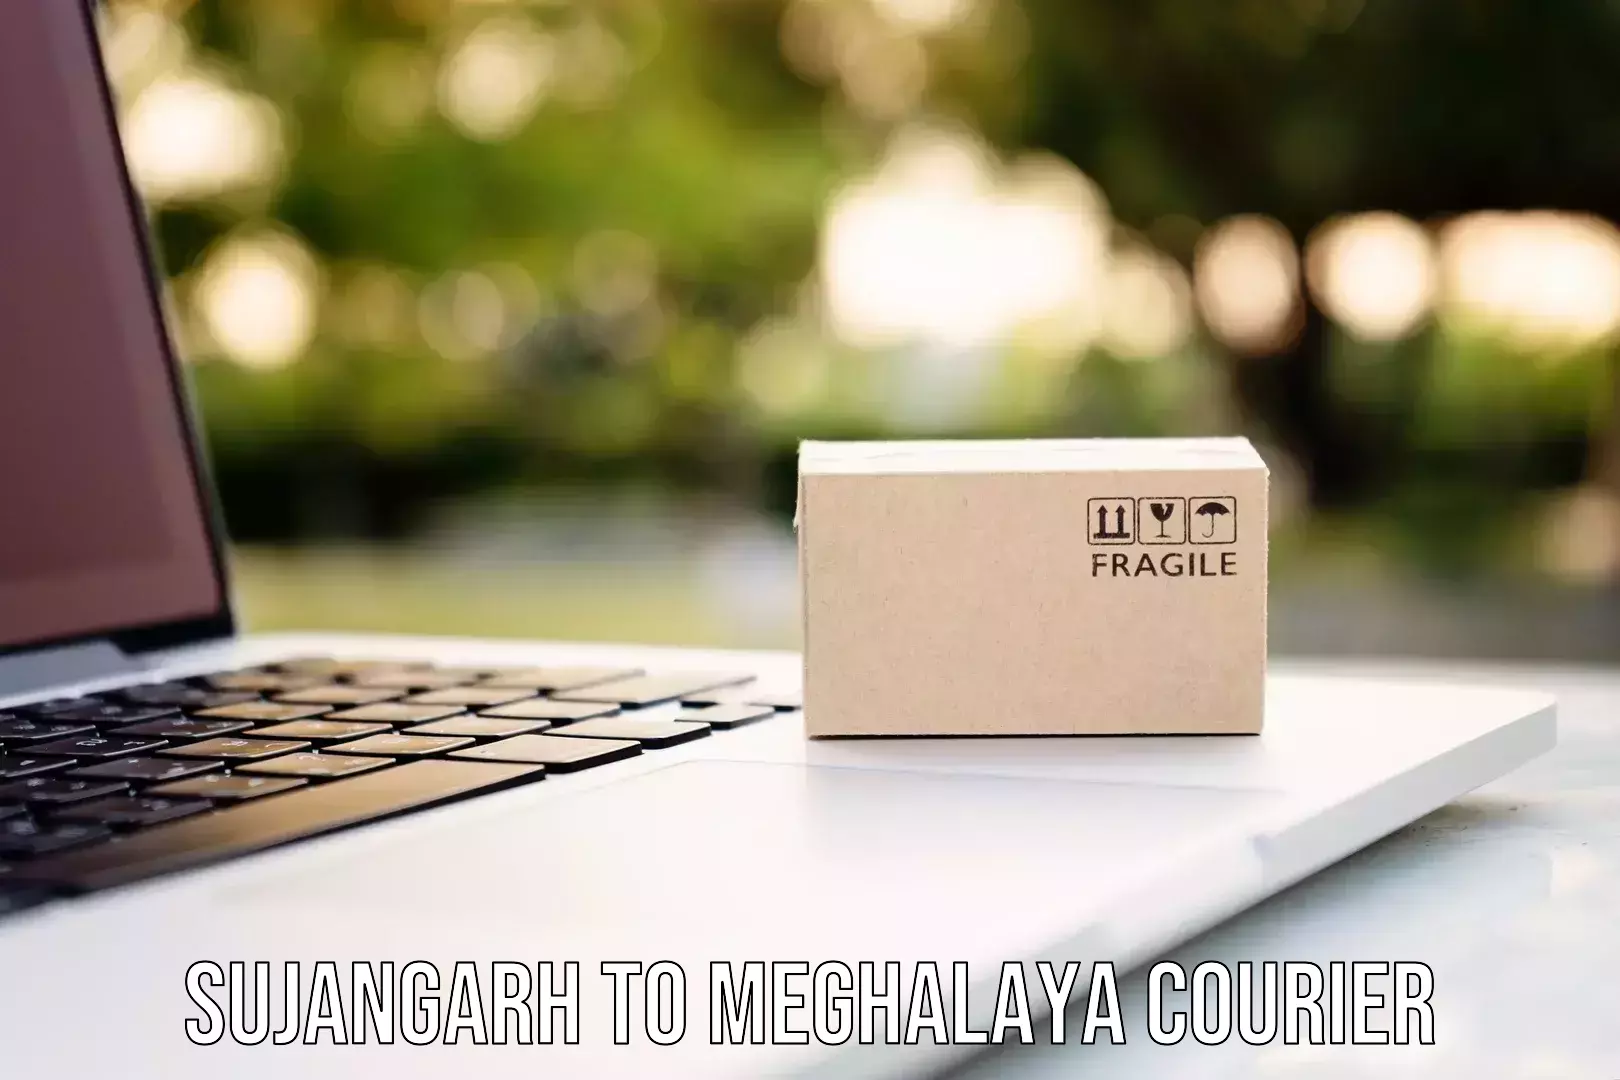 State-of-the-art courier technology Sujangarh to Meghalaya